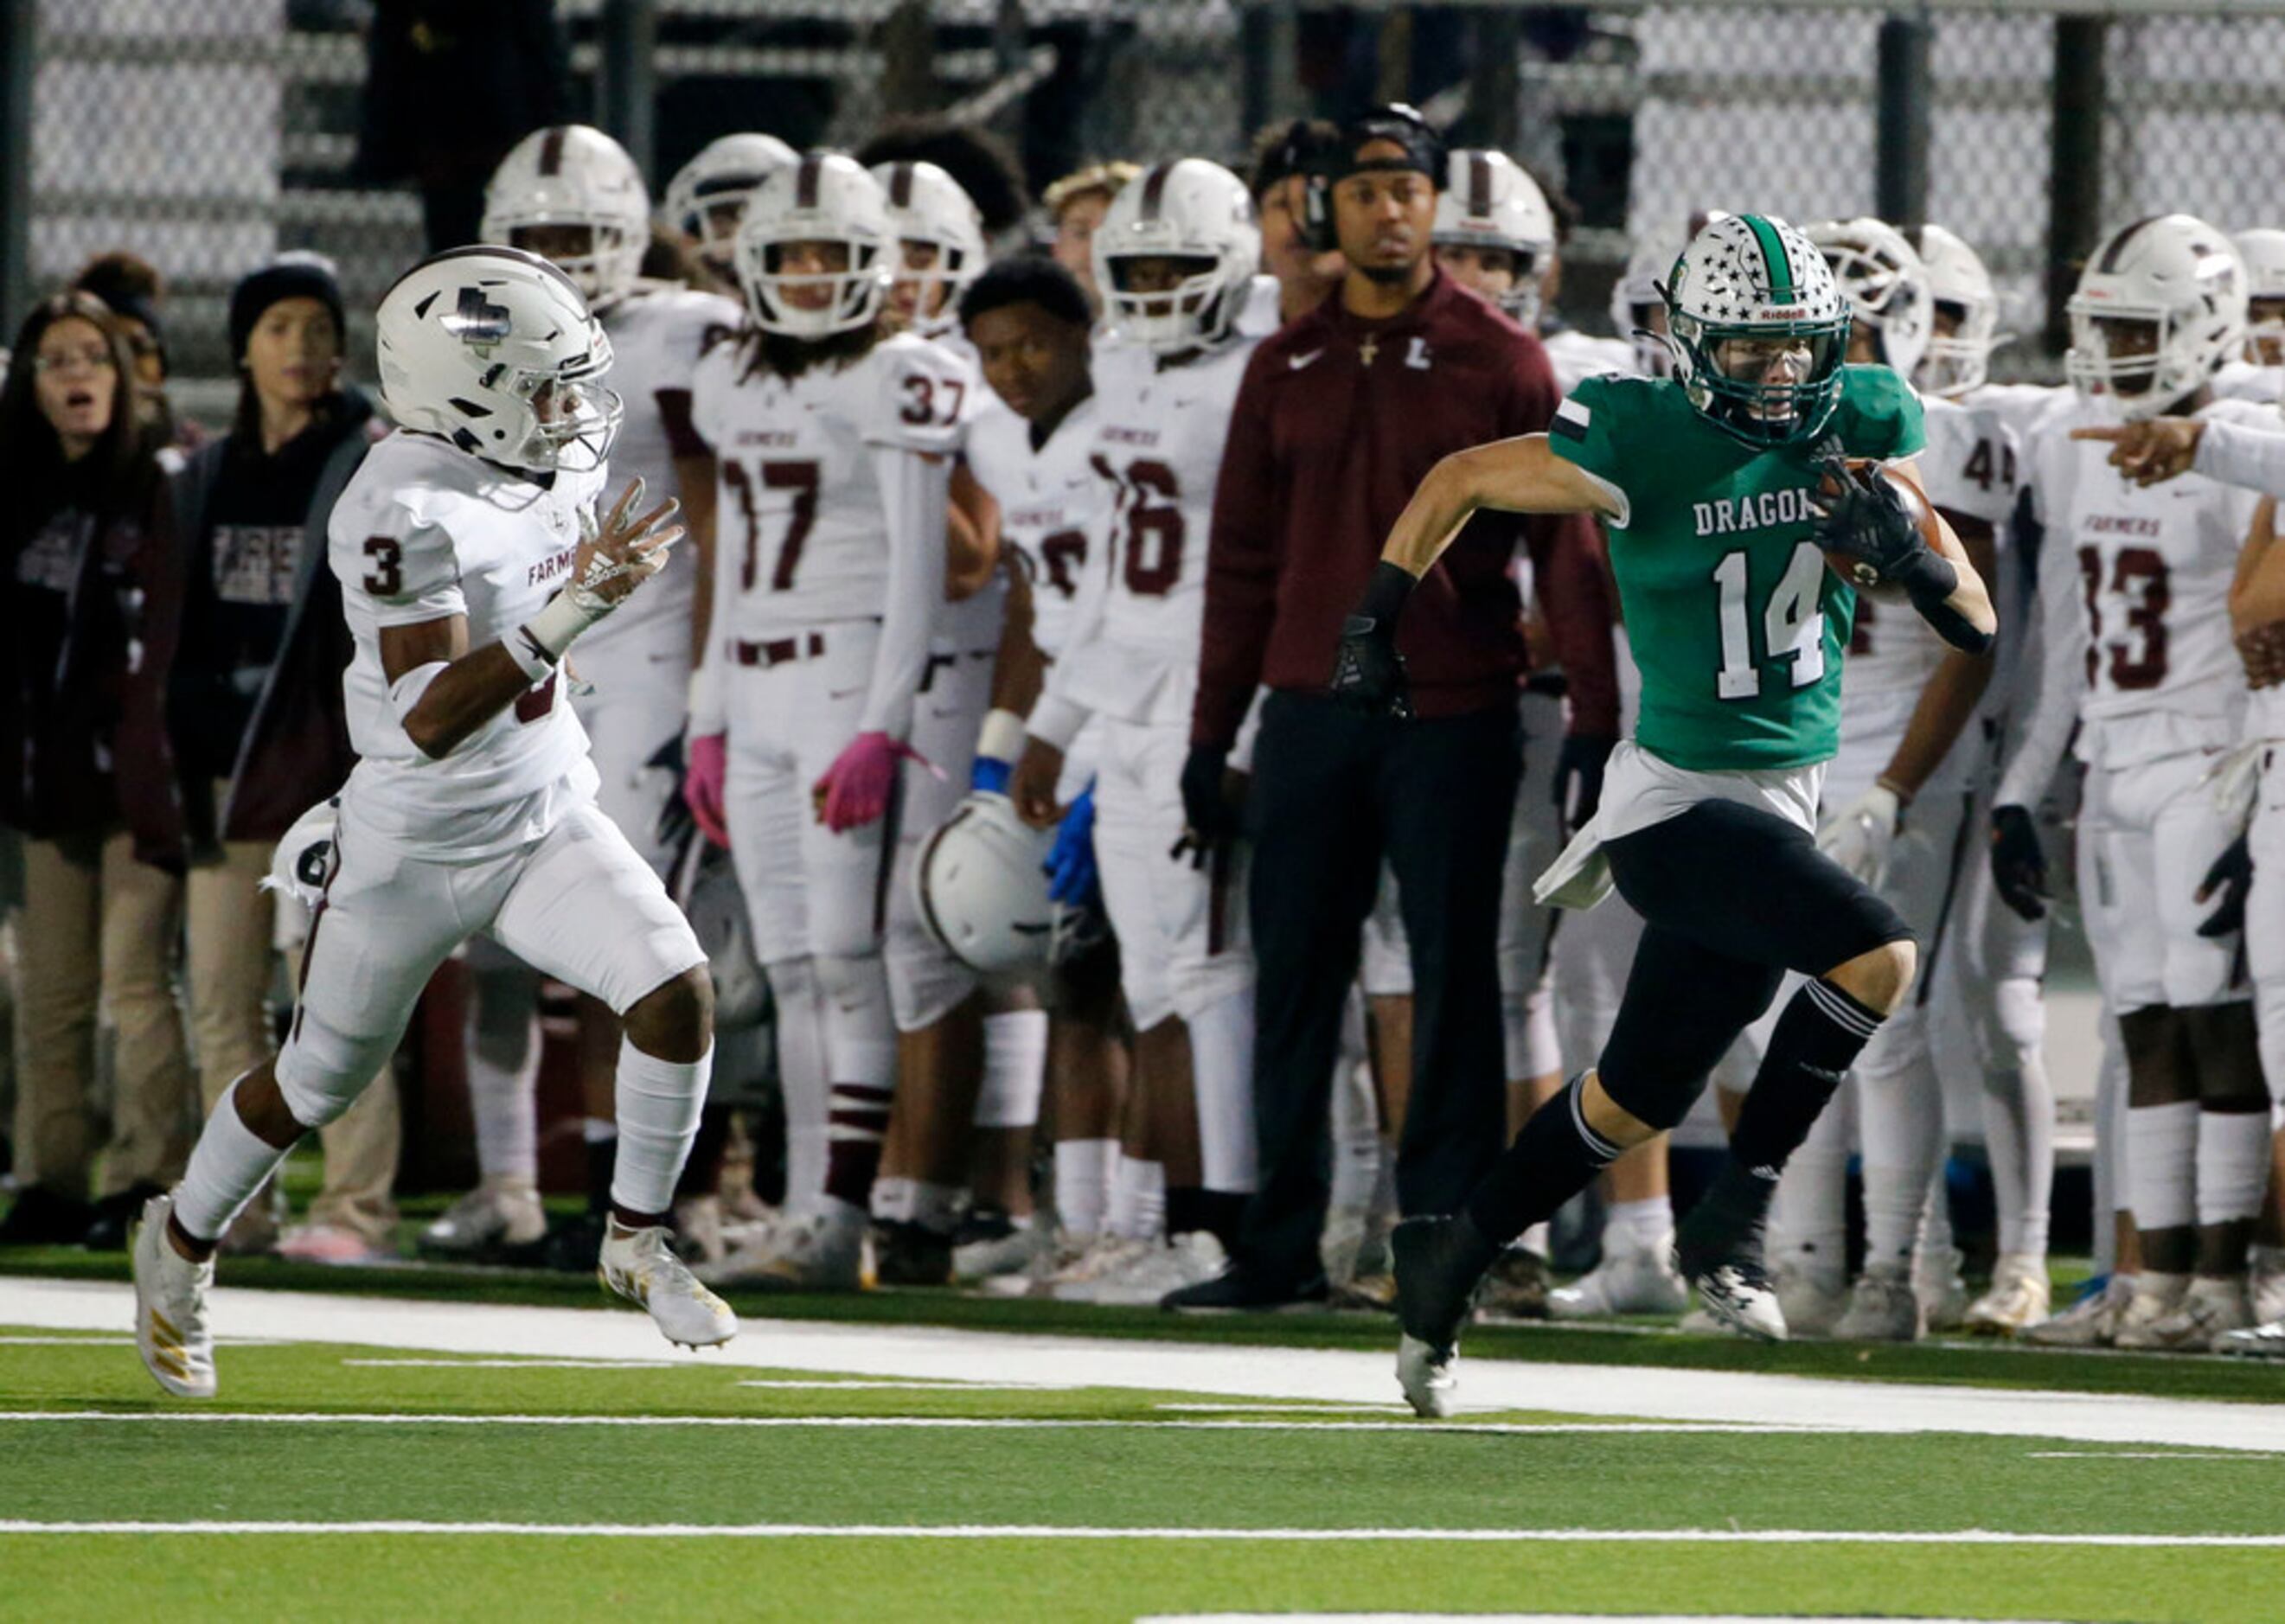 Southlake's Brady Boyd (14) makes a reception and races away from Lewisville defender Julius...